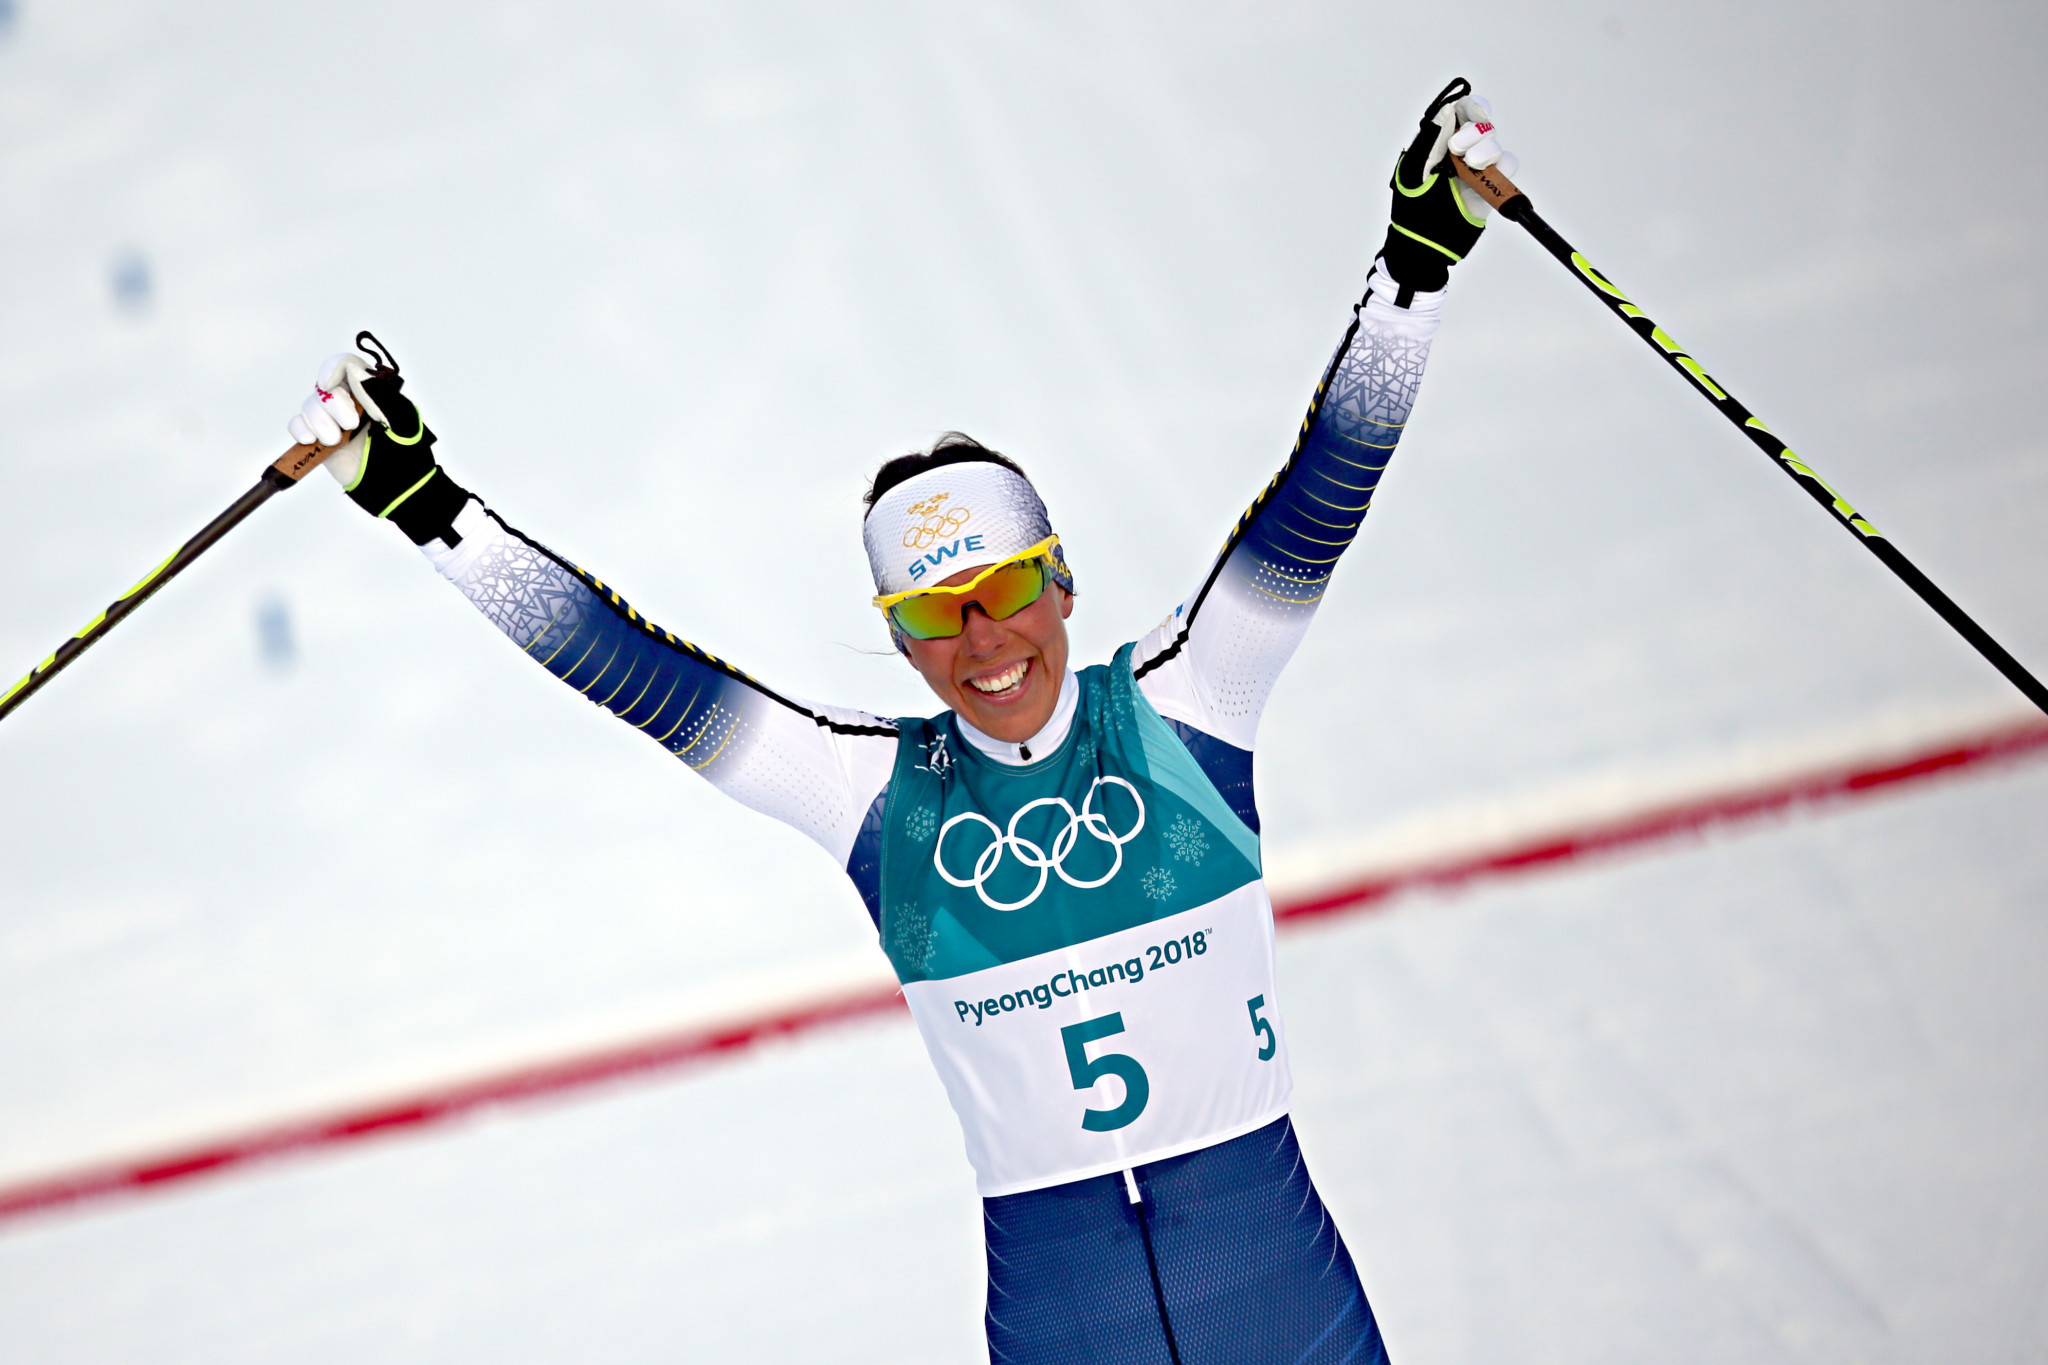 Charlotte Kalla, gold medallist in the women's 15 km skiathlon at Pyeongchang 2018, was named as part of Sweden's cross-country skiing team for Beijing 2022 ©Getty Images